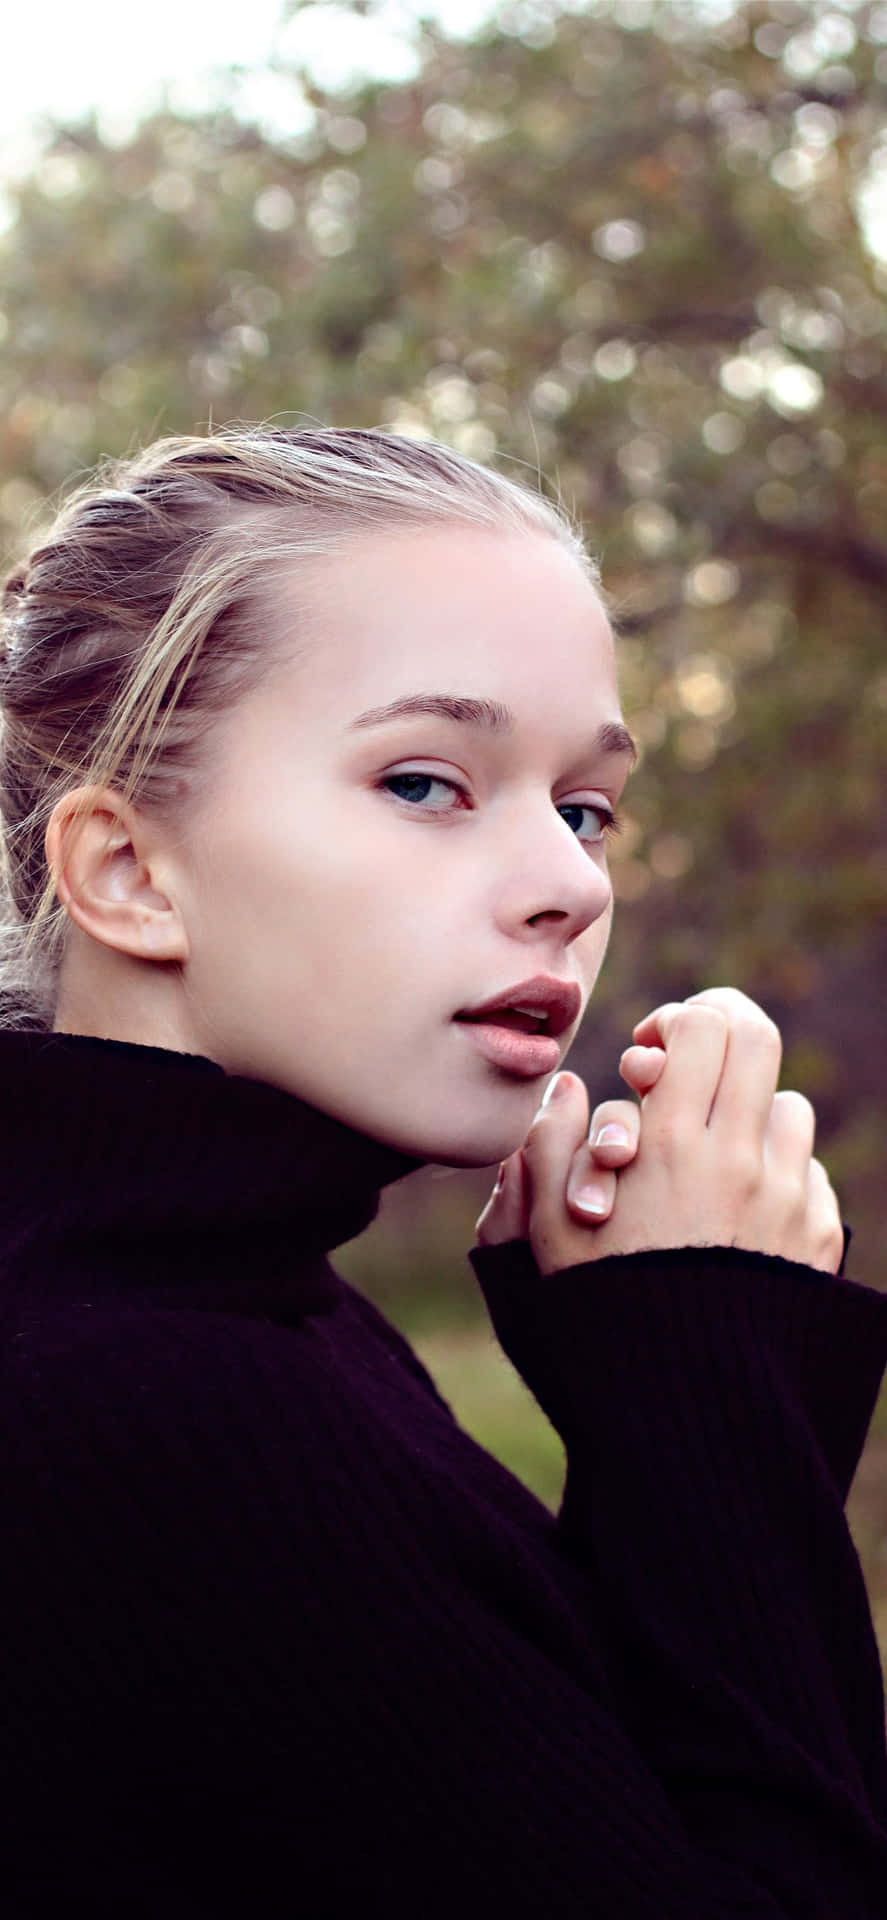 Teen Girl In Turtle Neck Shirt Picture